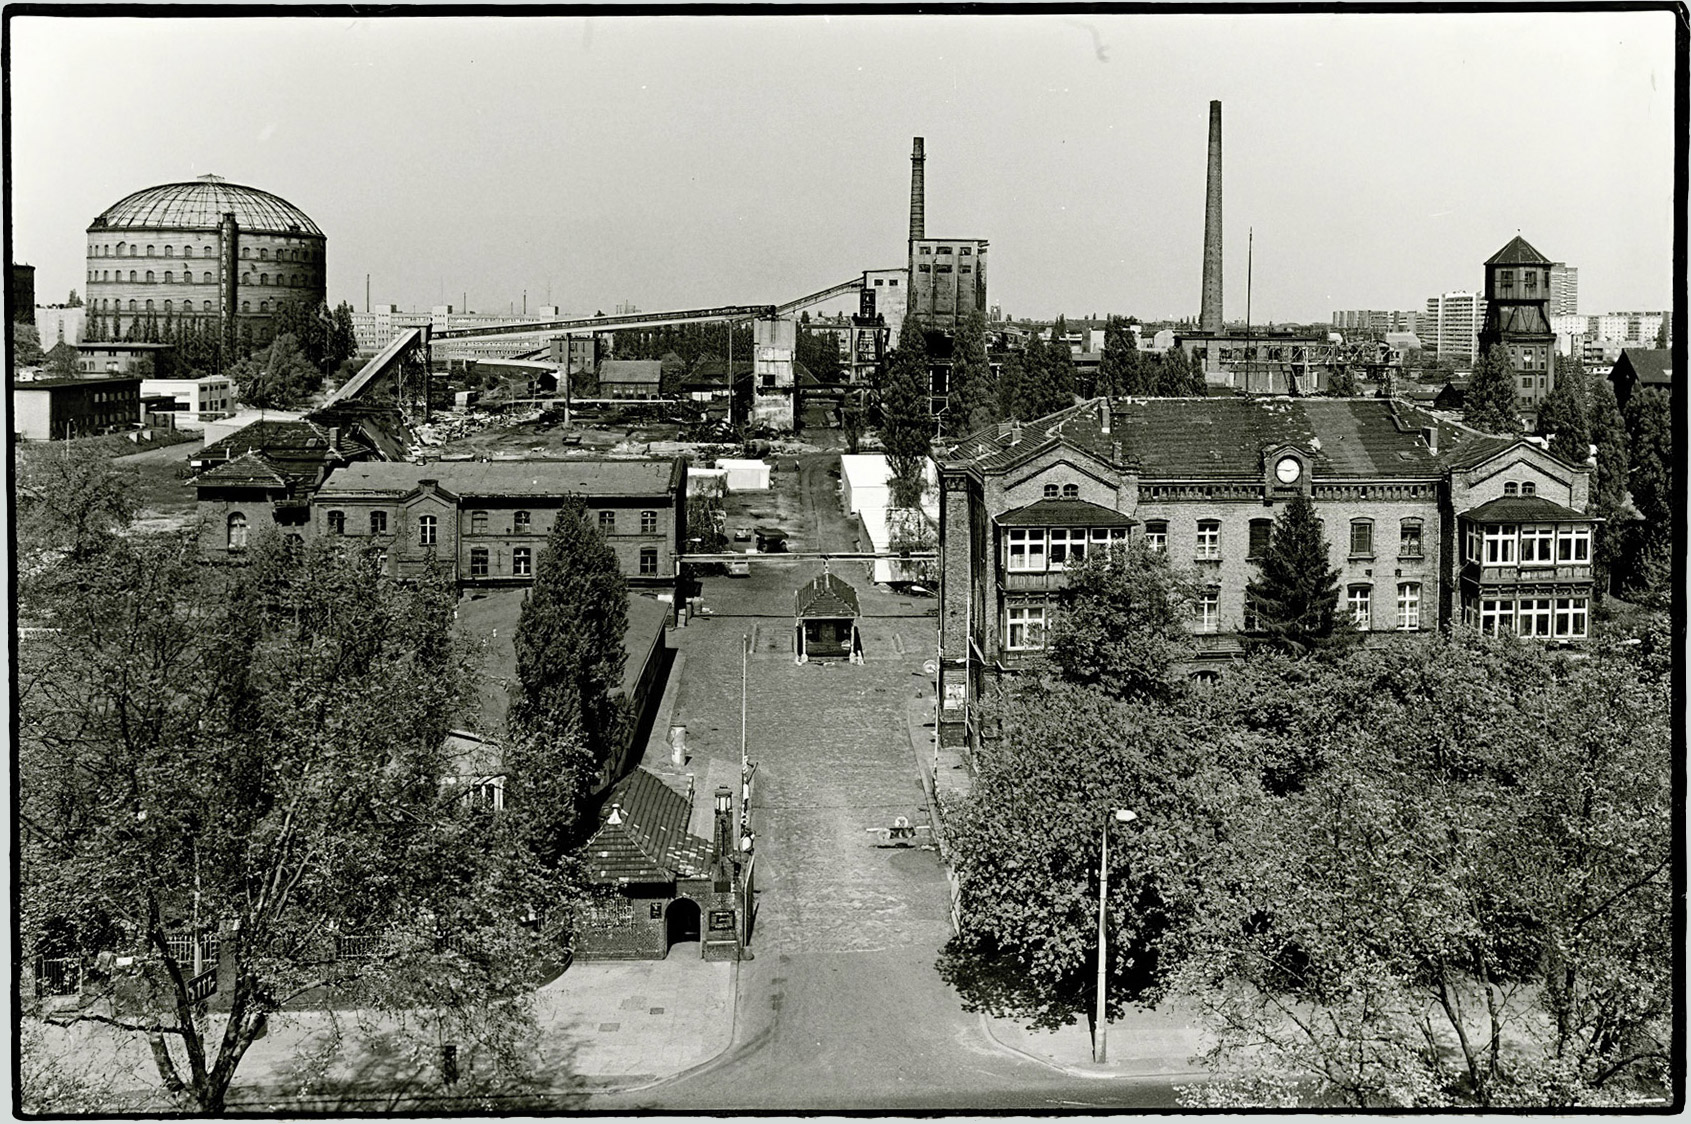 The main entrance to the gasworks on Danziger Strasse, around 1983. The buildings in the foreground are still preserved. They have been used as cultural facilities since 1986 until today. On the left in the background one of the three gasometers.